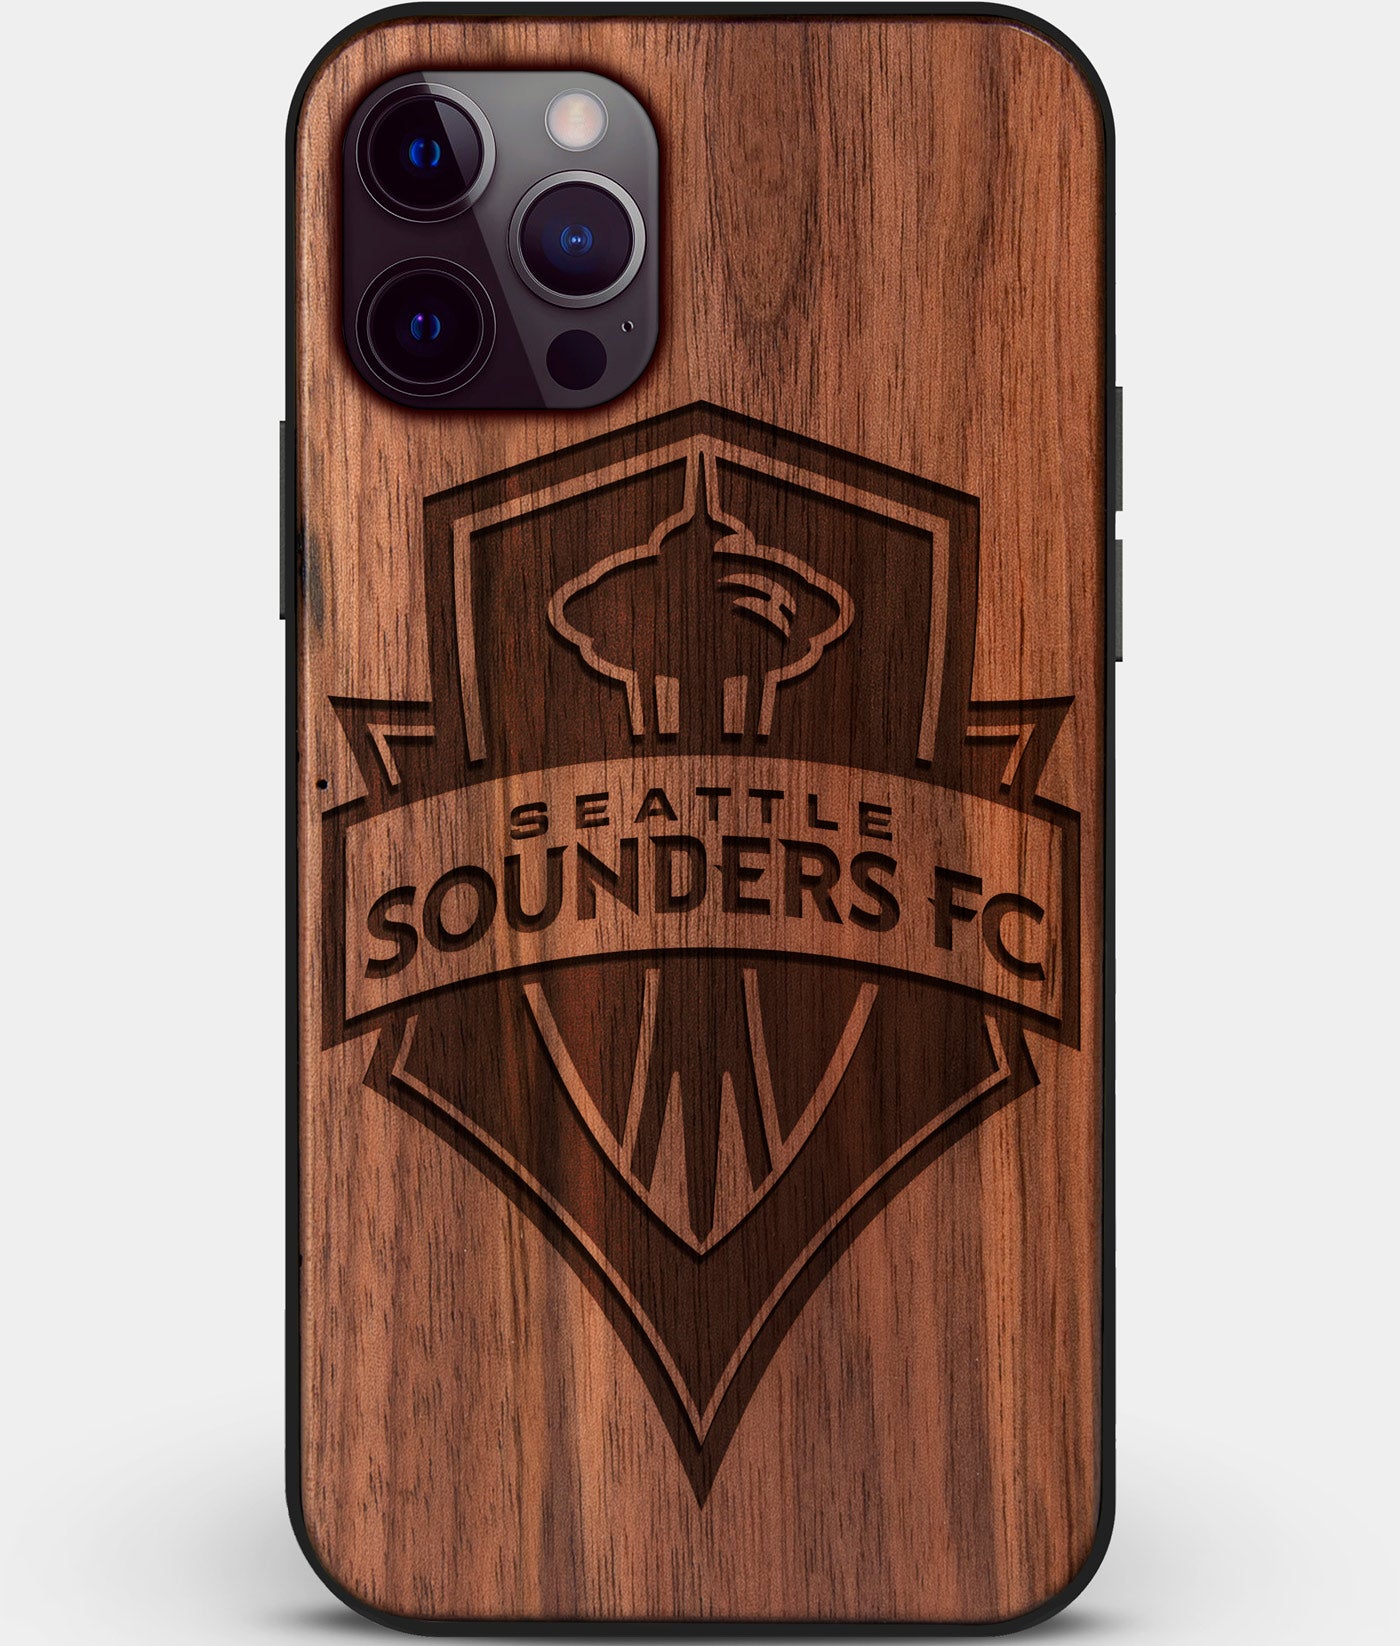 Custom Carved Wood Seattle Sounders FC iPhone 12 Pro Max Case | Personalized Walnut Wood Seattle Sounders FC Cover, Birthday Gift, Gifts For Him, Monogrammed Gift For Fan | by Engraved In Nature